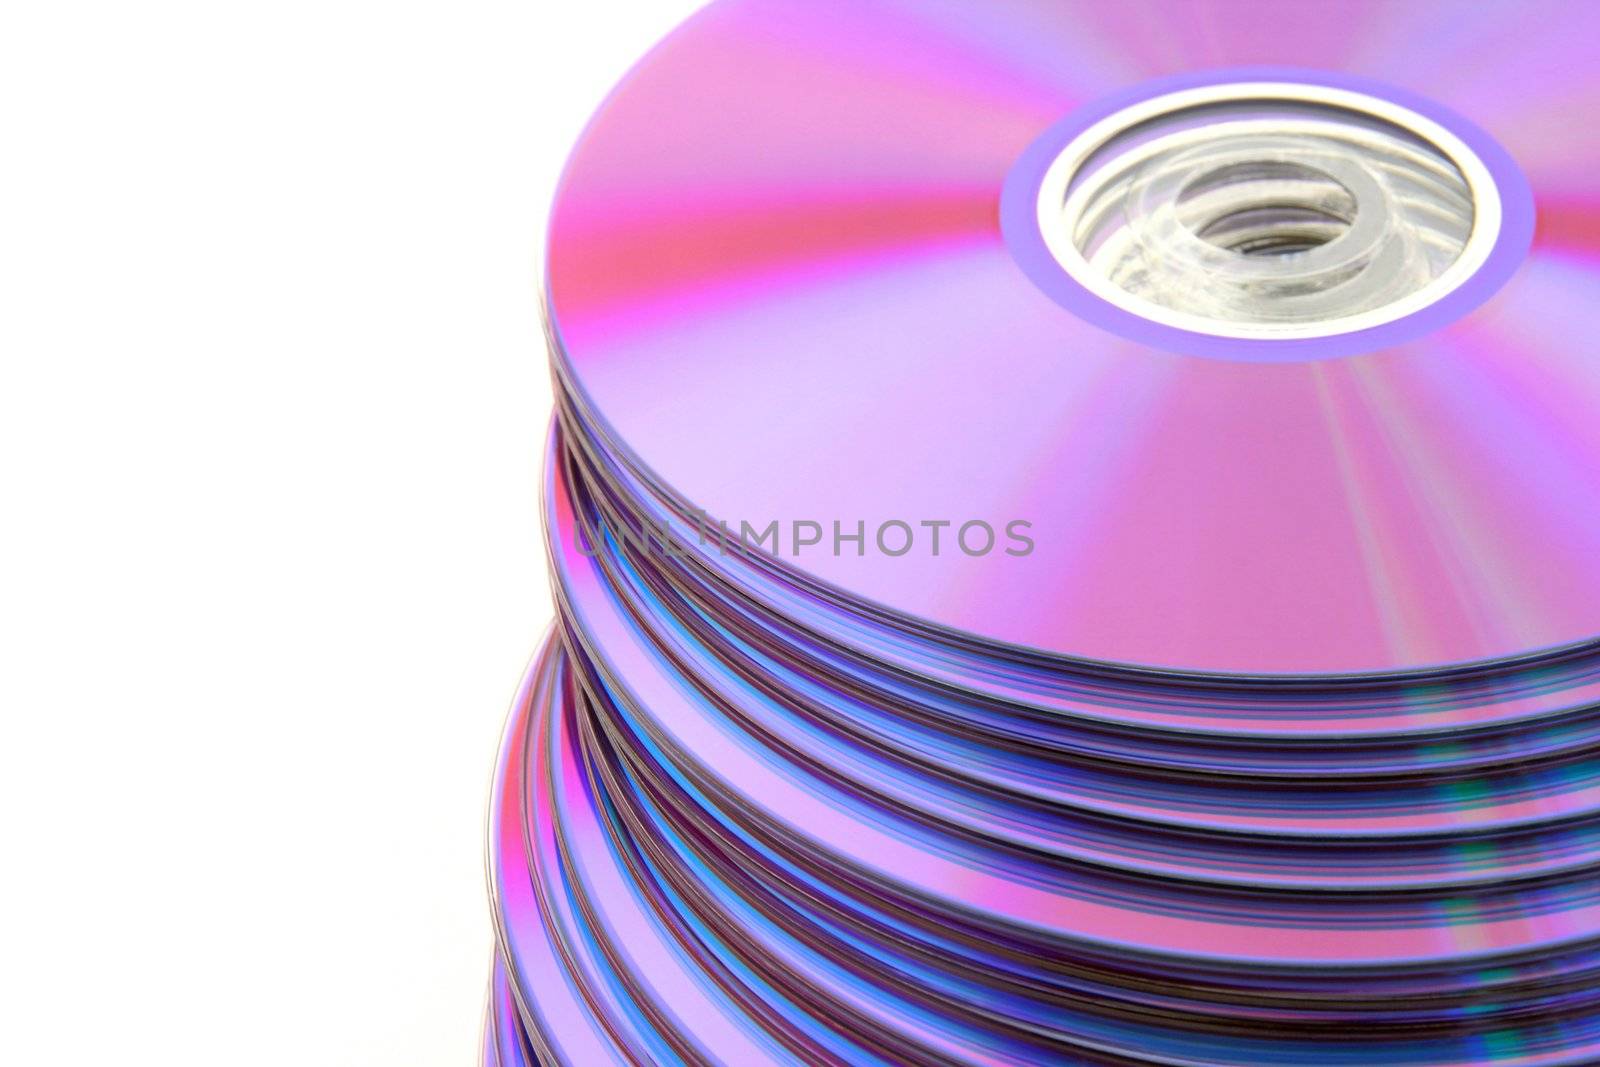 Stacked colorful DVDs or CDs isolated on white background. No dust.